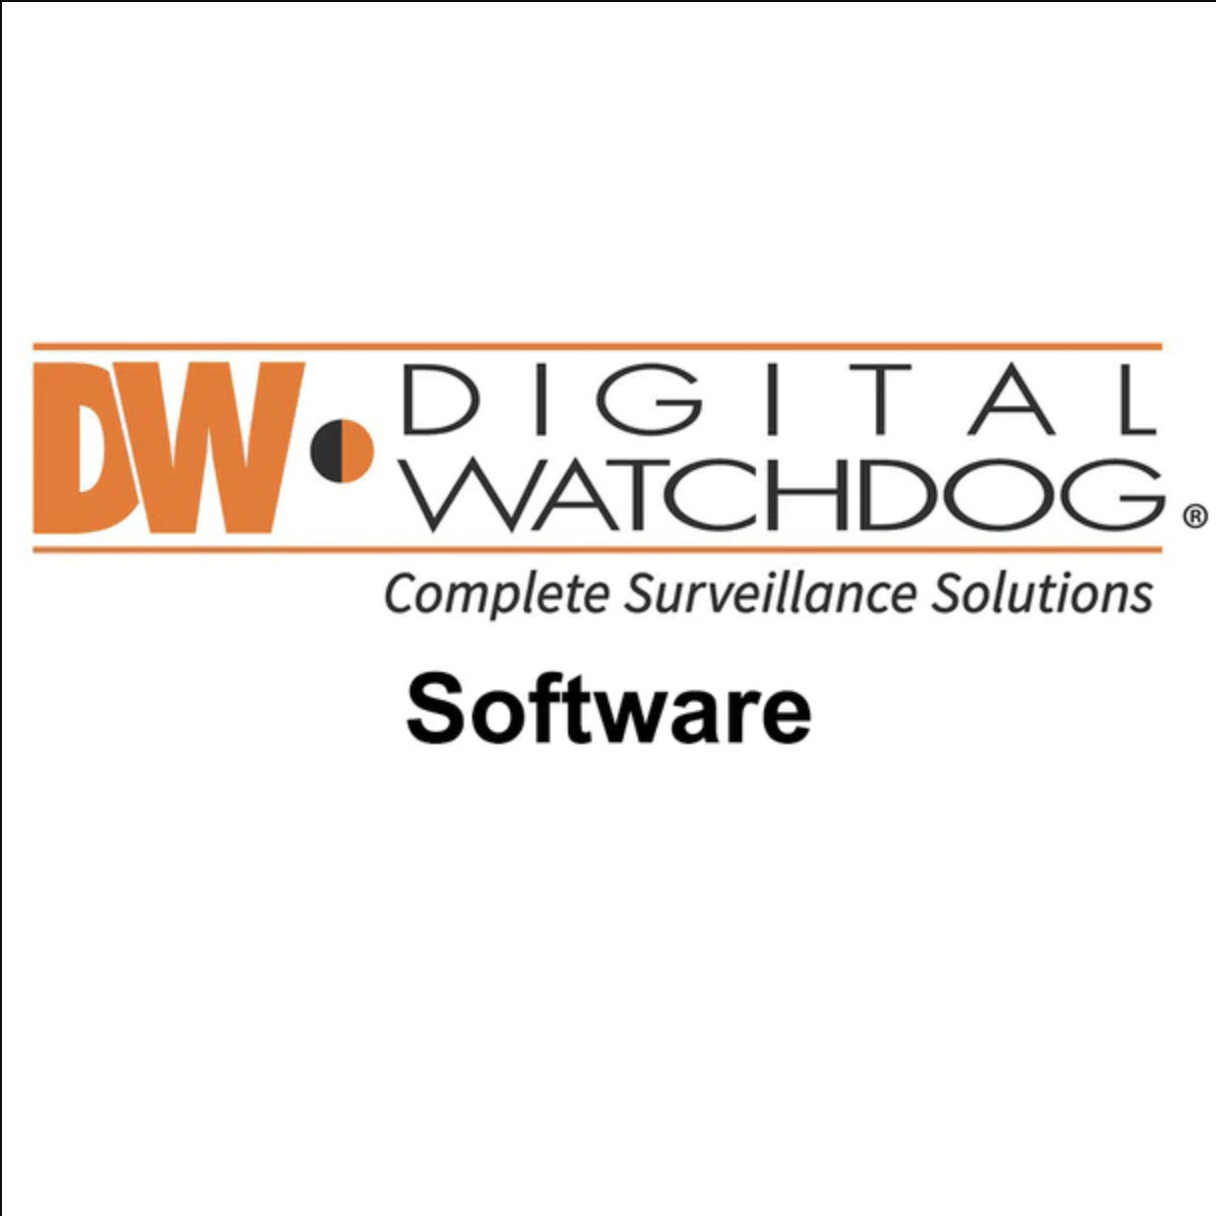 Difference Between Digital Watchdog and Hikvision